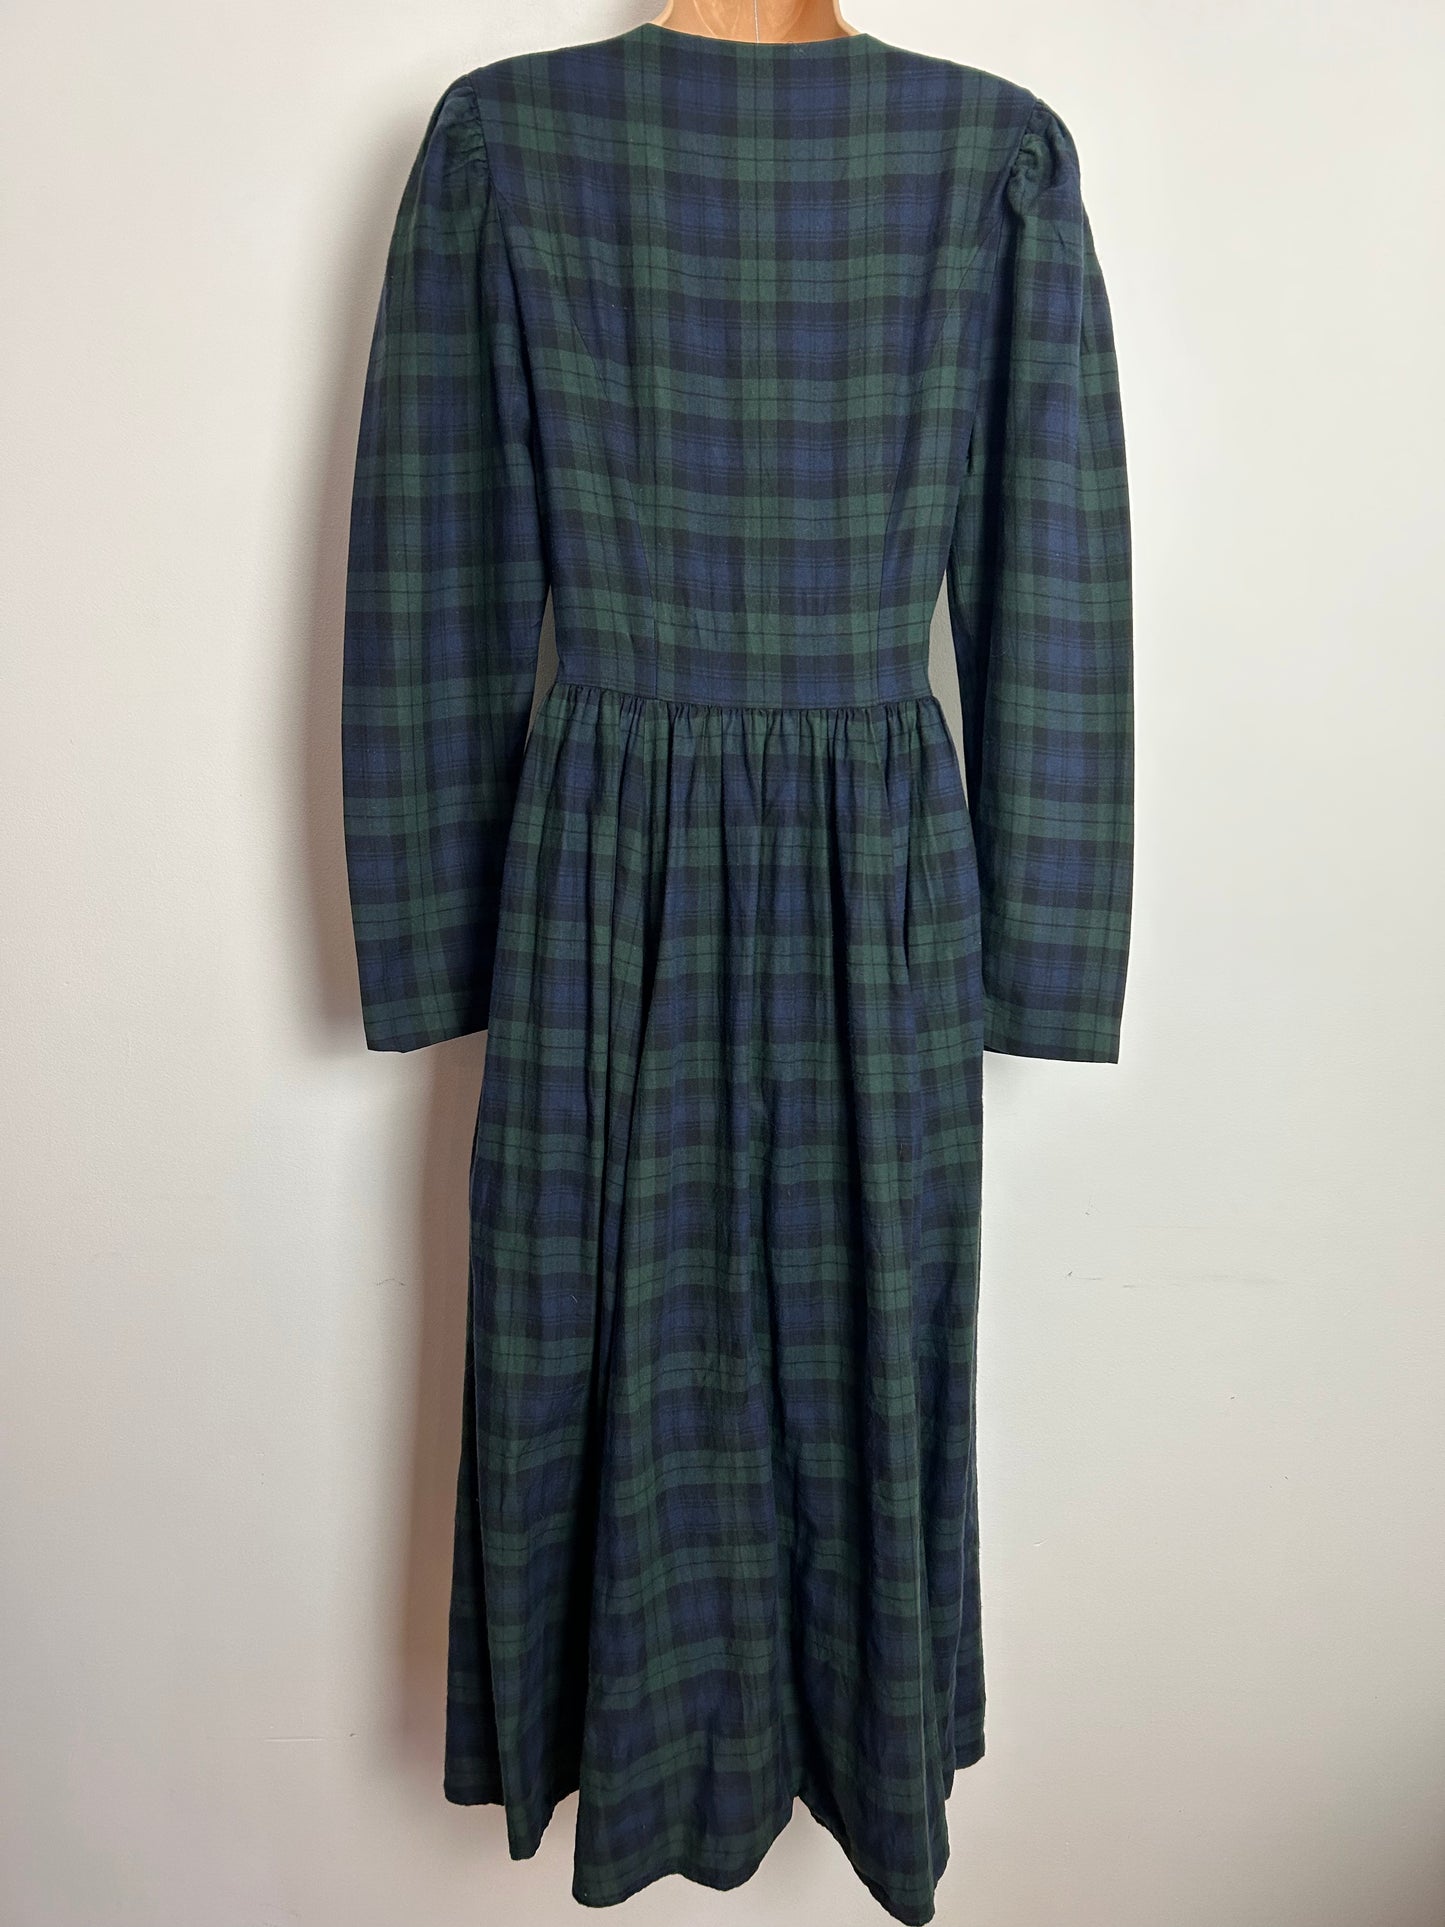 Vintage 1980s LAURA ASHLEY Made in Hungary UK Size 8 (12 On Label) Dark Blue & Green Check Print 100% Cotton Gather Pleated Midi Day Dress